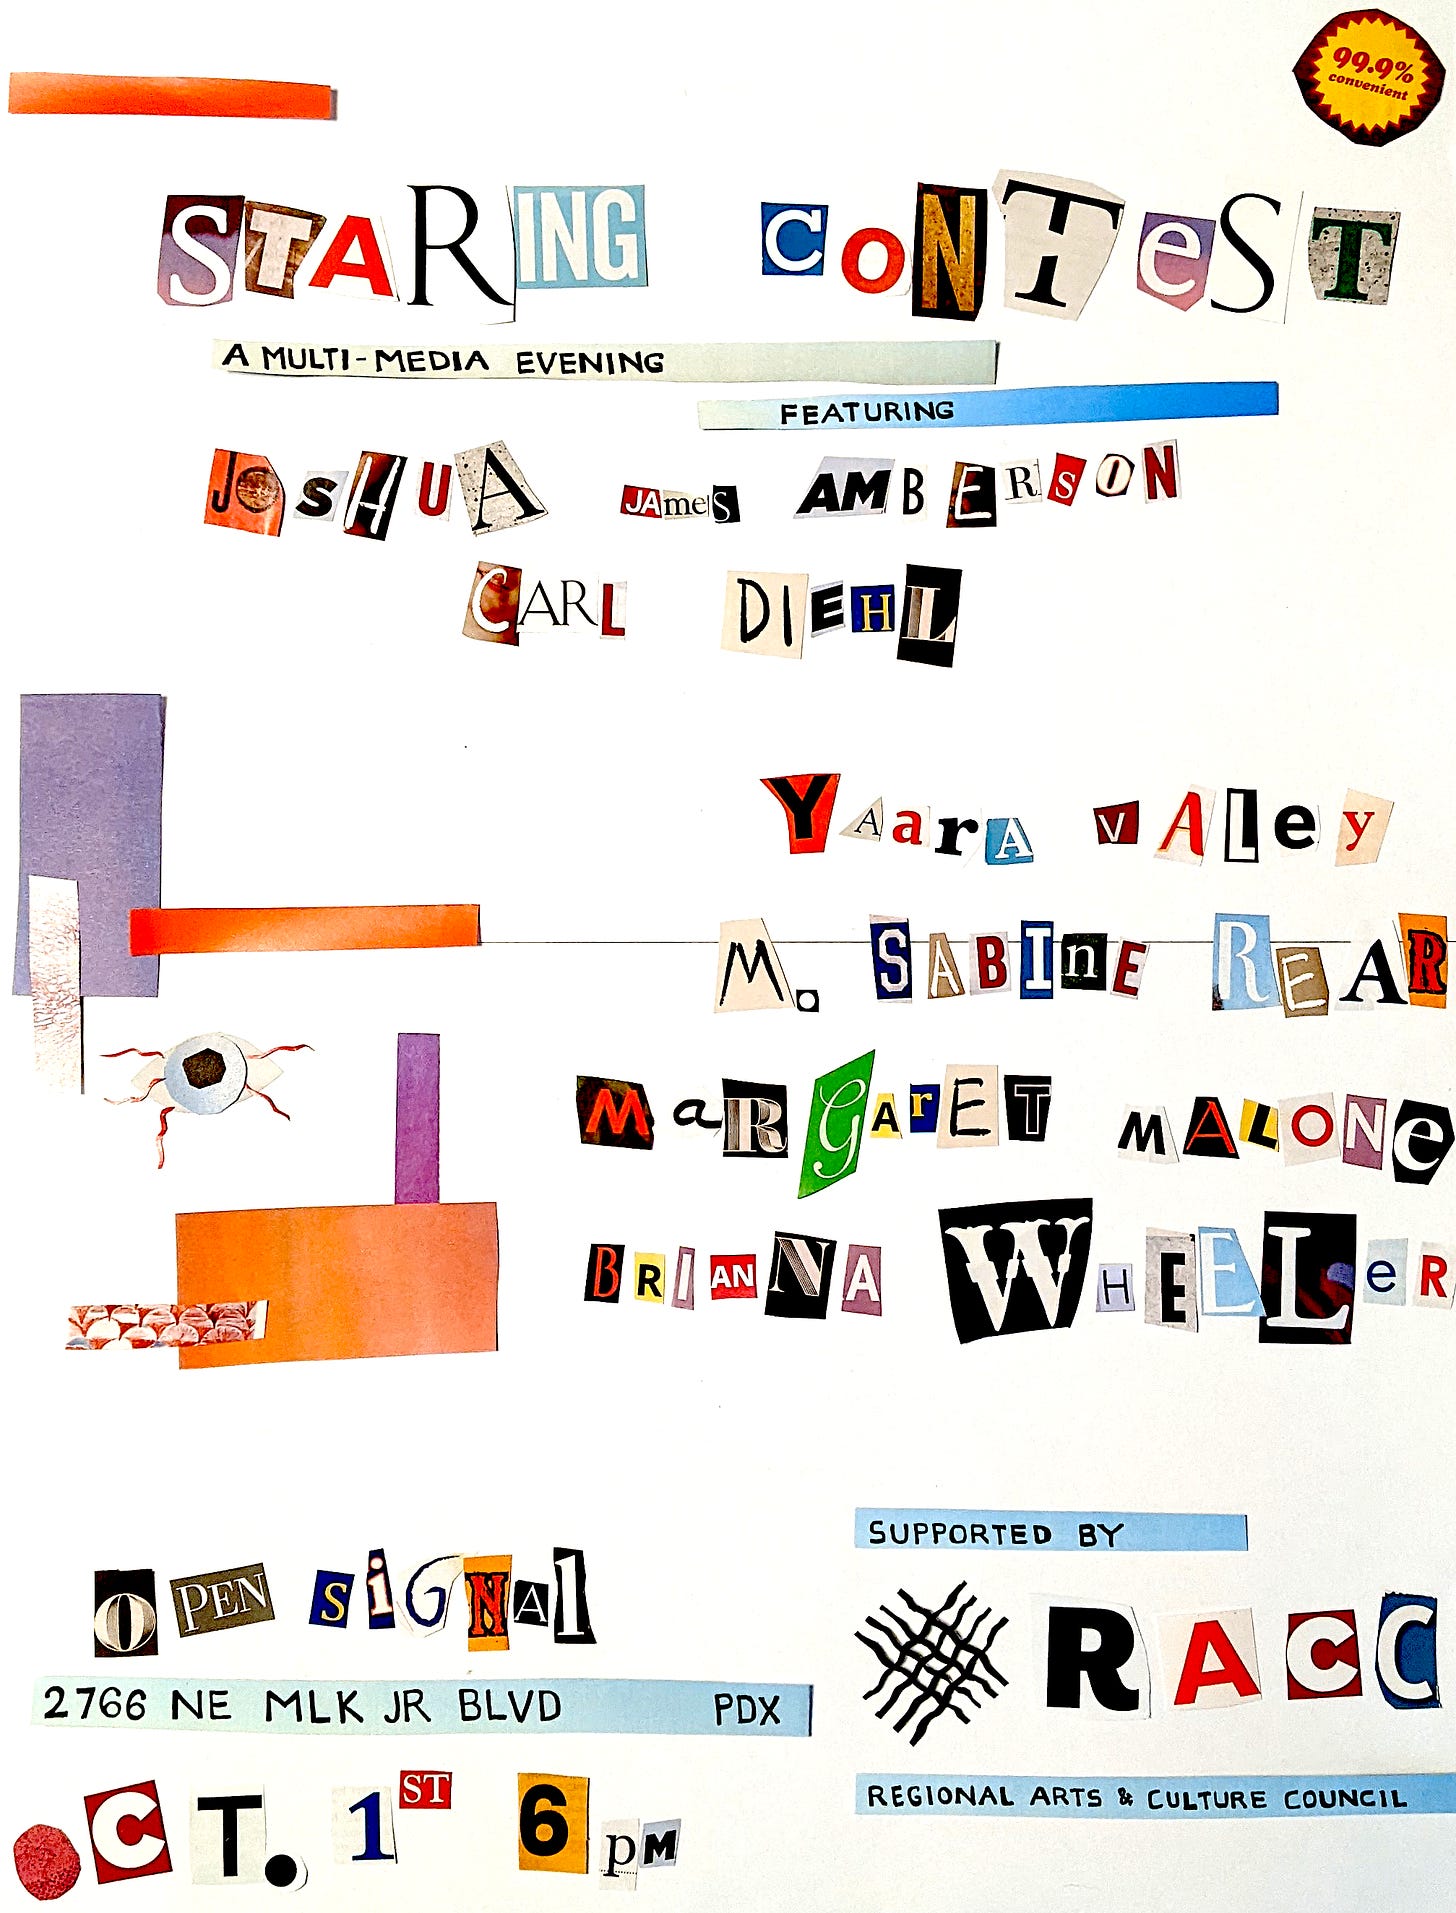 A cut-and-paste, "ransom note" style flyer with letters of different sizes and colors, small strips of paper, and little eyeballs. For an event on October 1st at the Open Signal media arts center in Portland, Oregon.